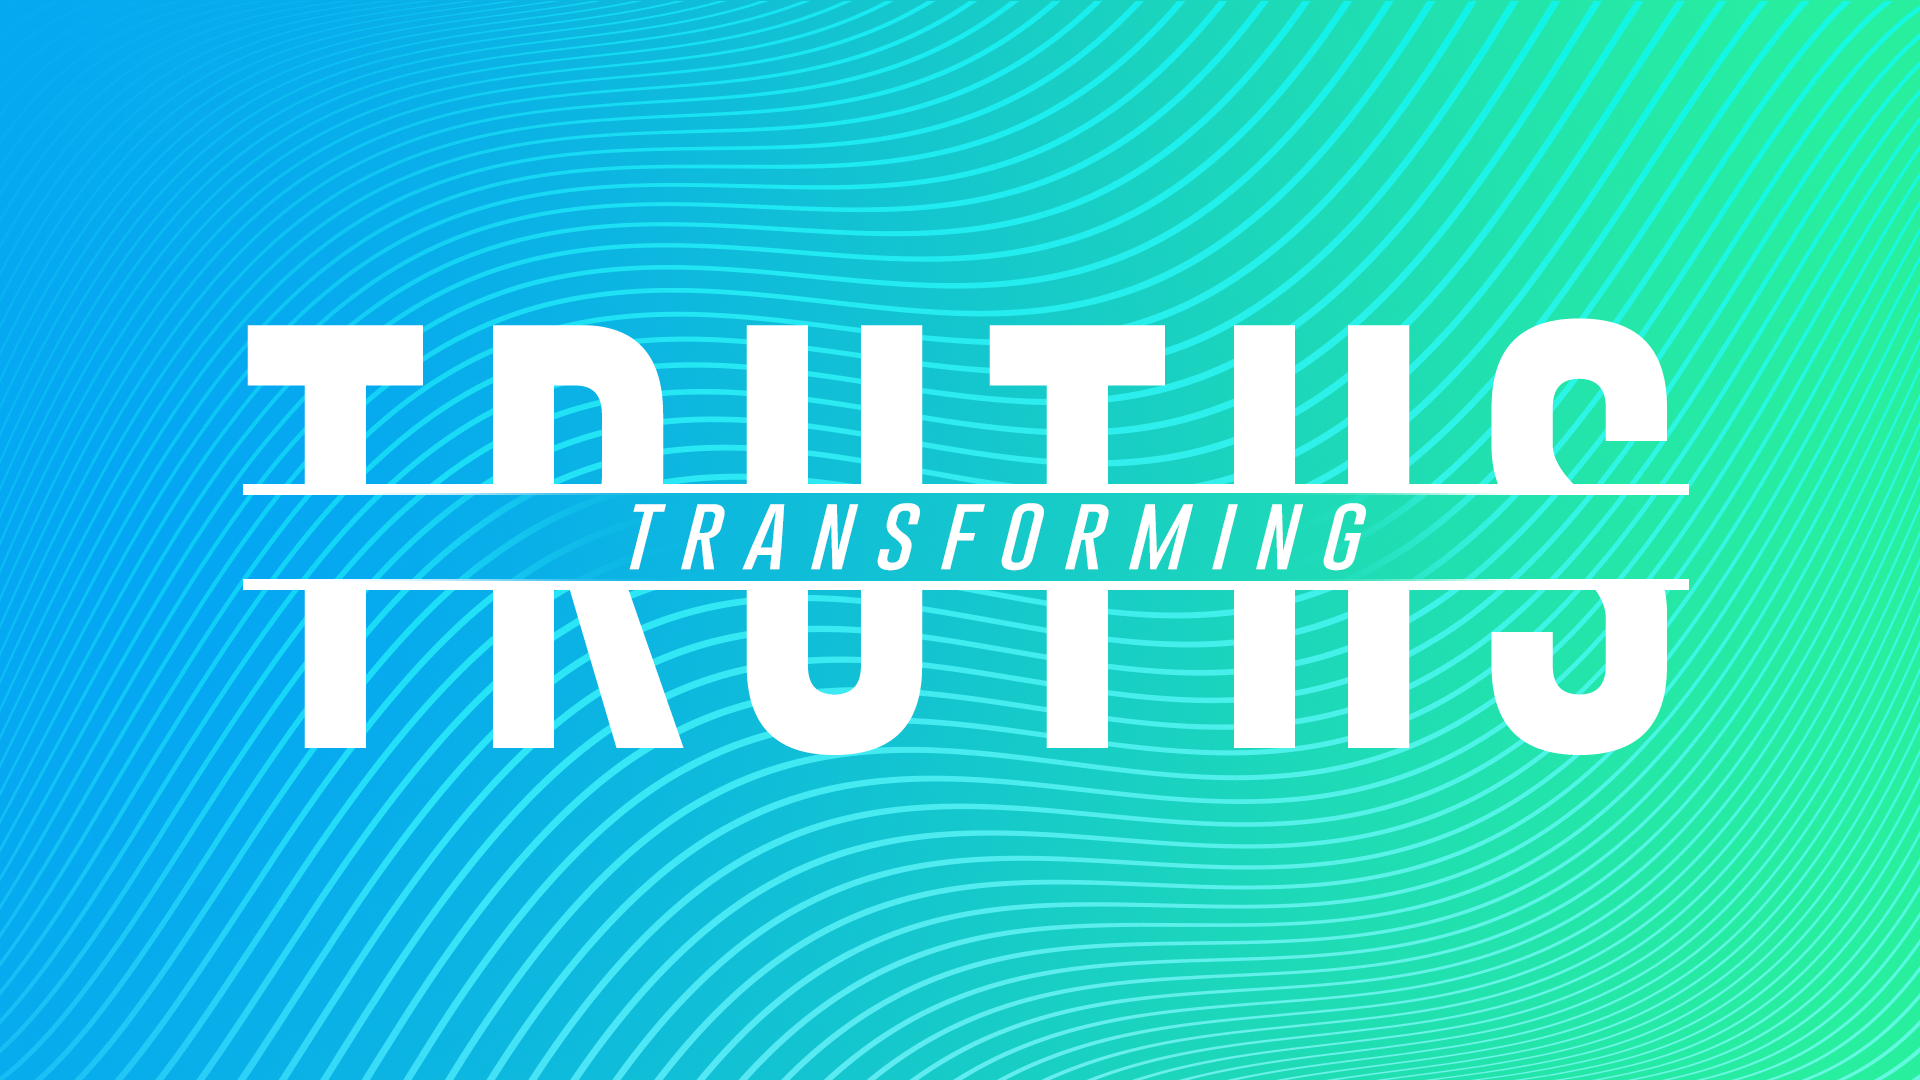 August 30, 2020 – Transforming Truths